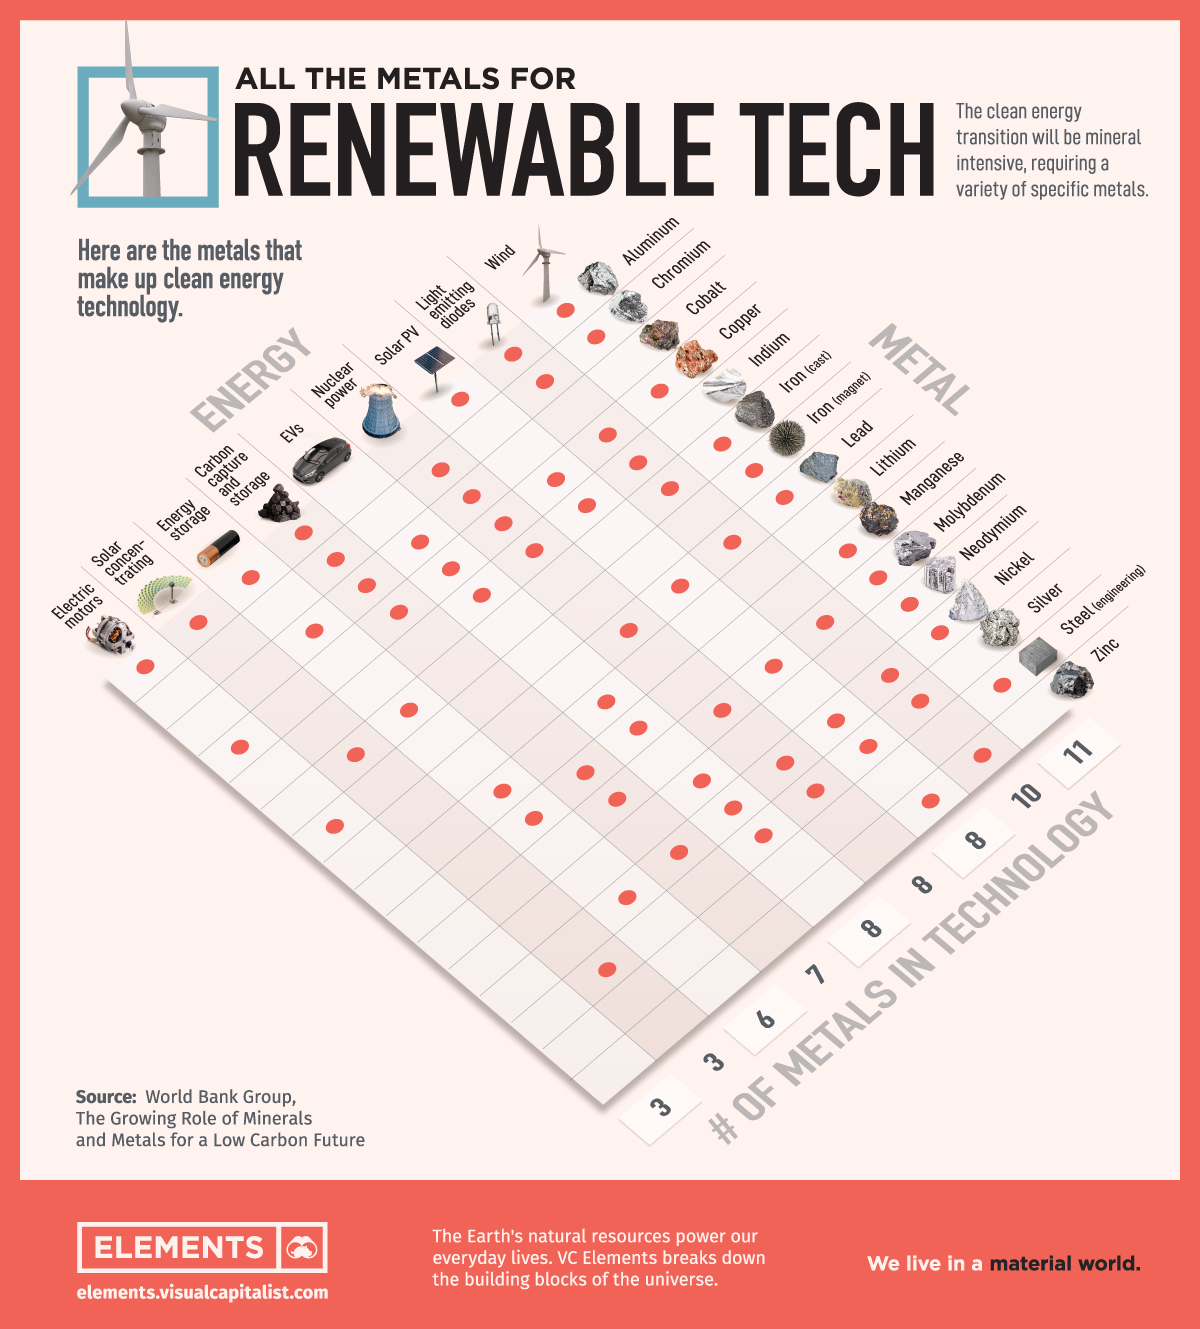 All the Metals for Renewable Tech